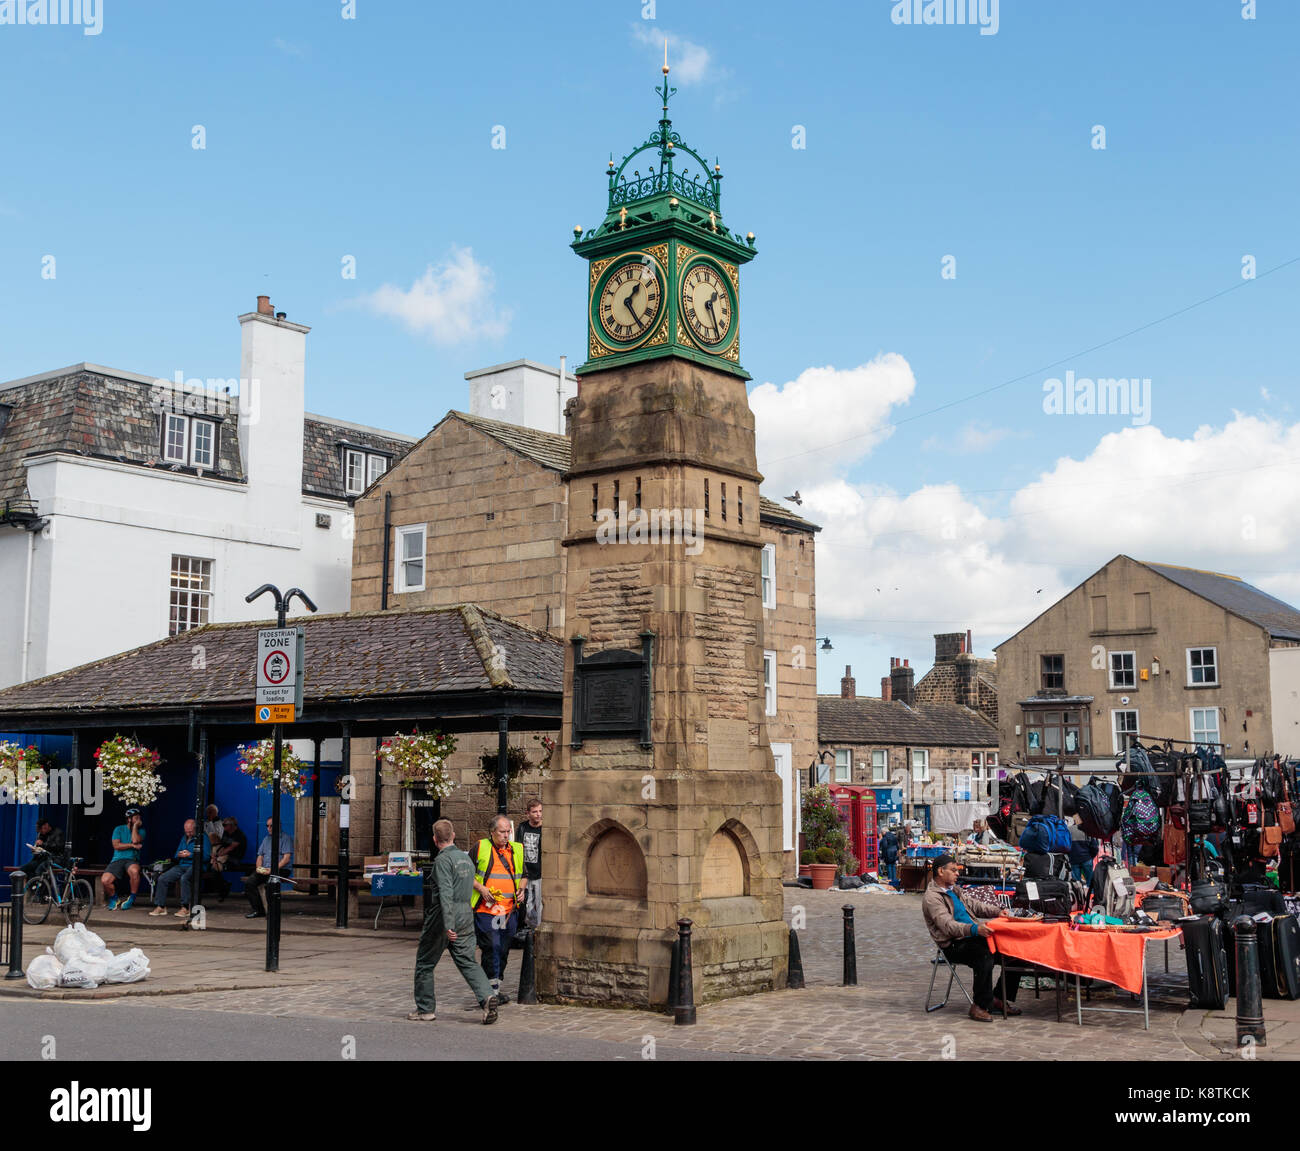 Unidentified people shopping in Otley outdoor market, next to the Jubilee clock tower Stock Photo